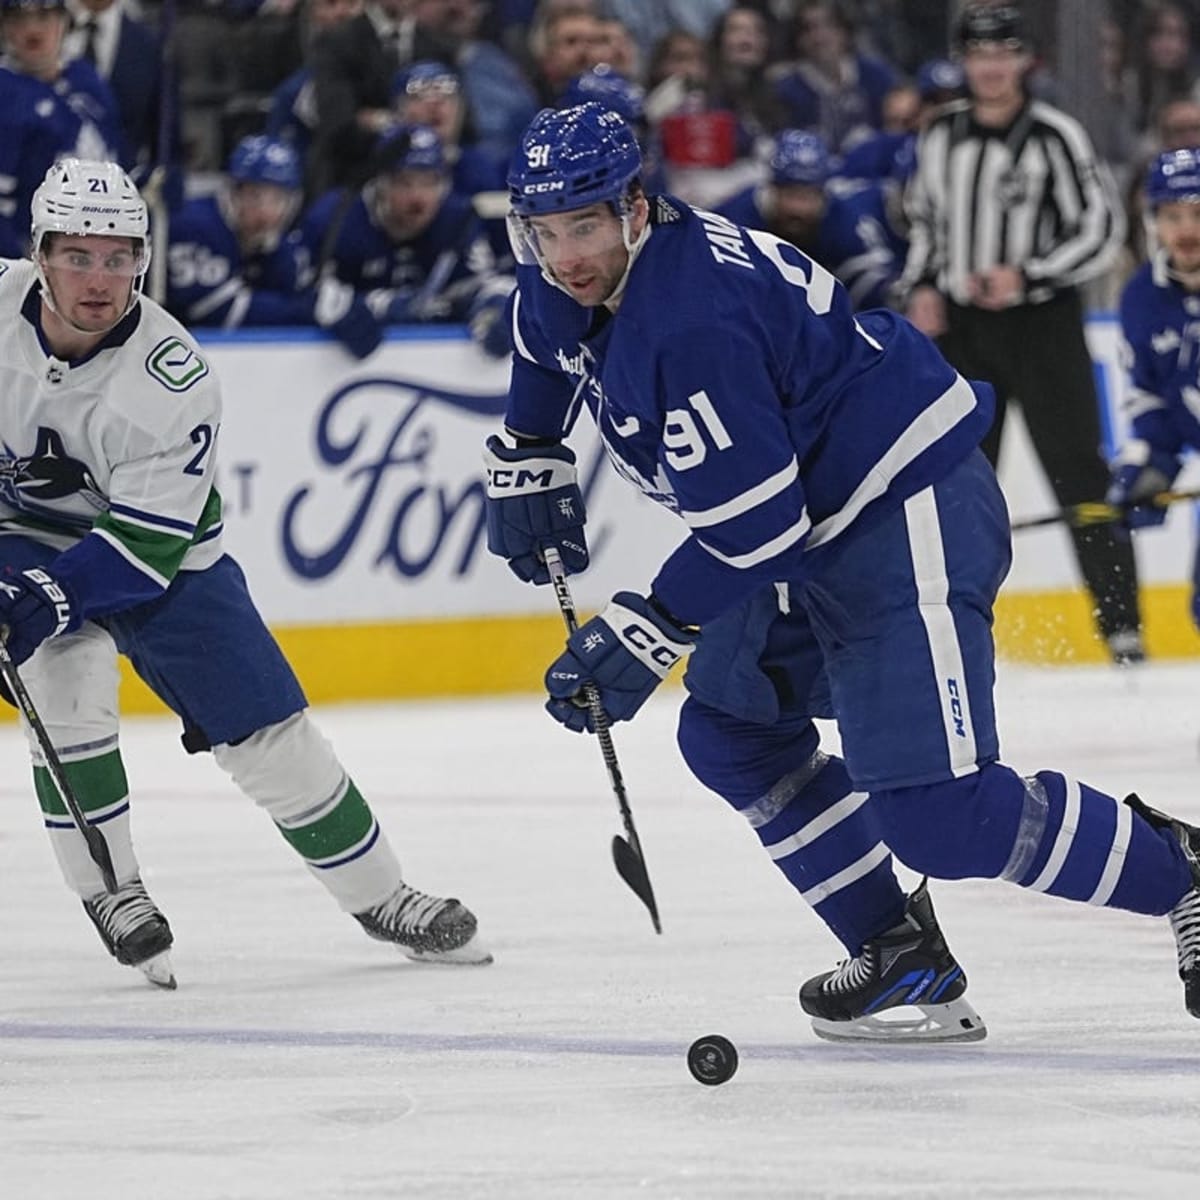 Sabres at Maple Leafs Free Live Stream NHL Online, Channel - How to Watch and Stream Major League and College Sports